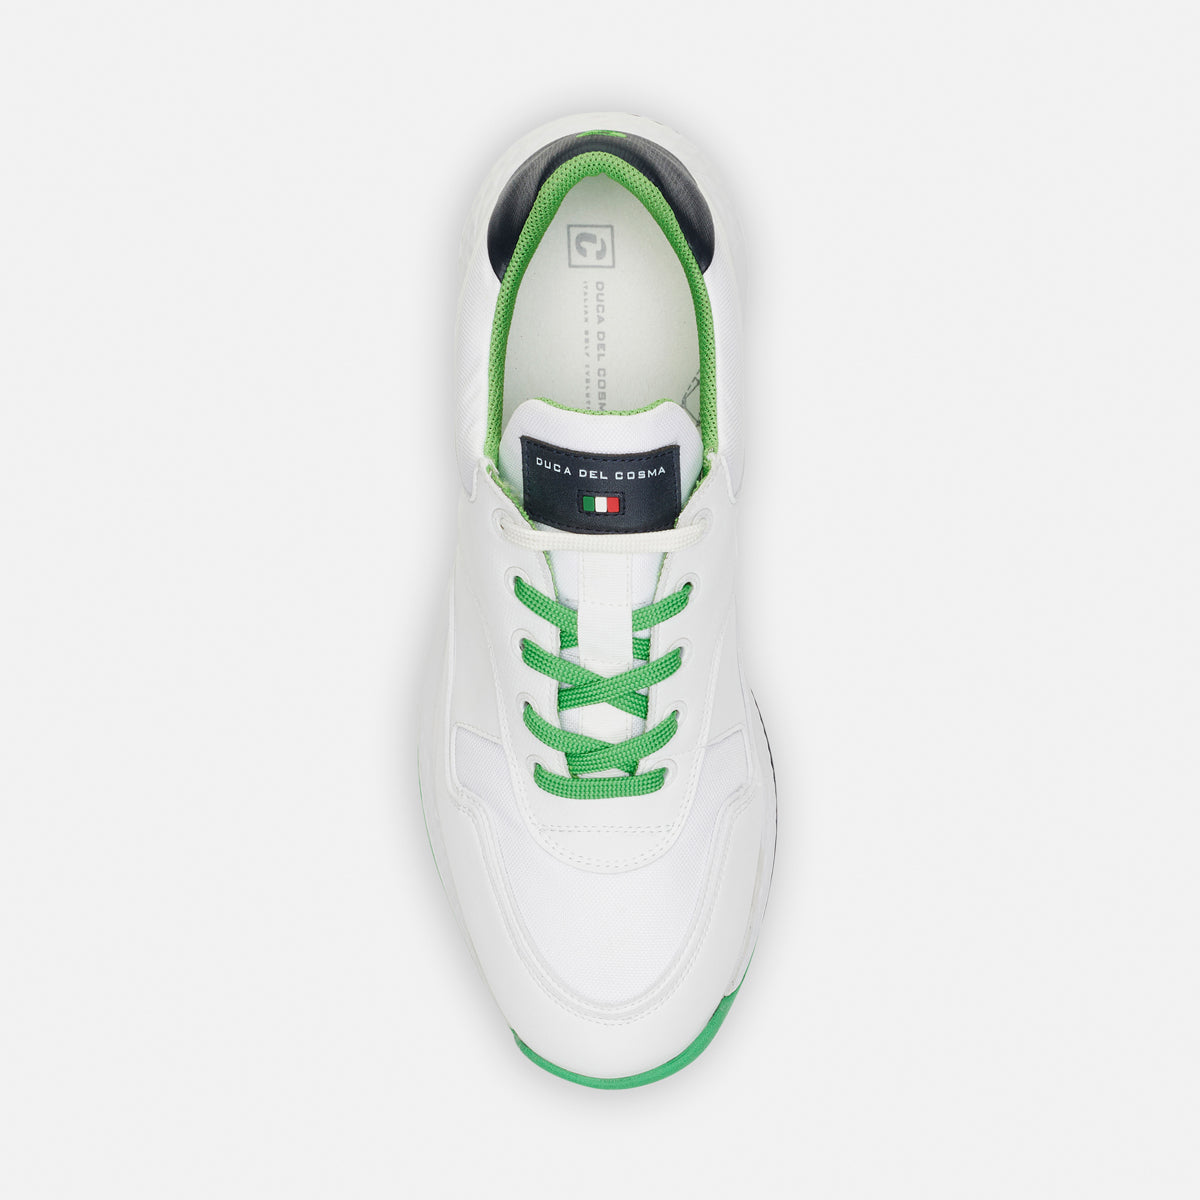 Pagani white mens Golf Shoes Duca del Cosma Waterproof best golf shoe for the golf course